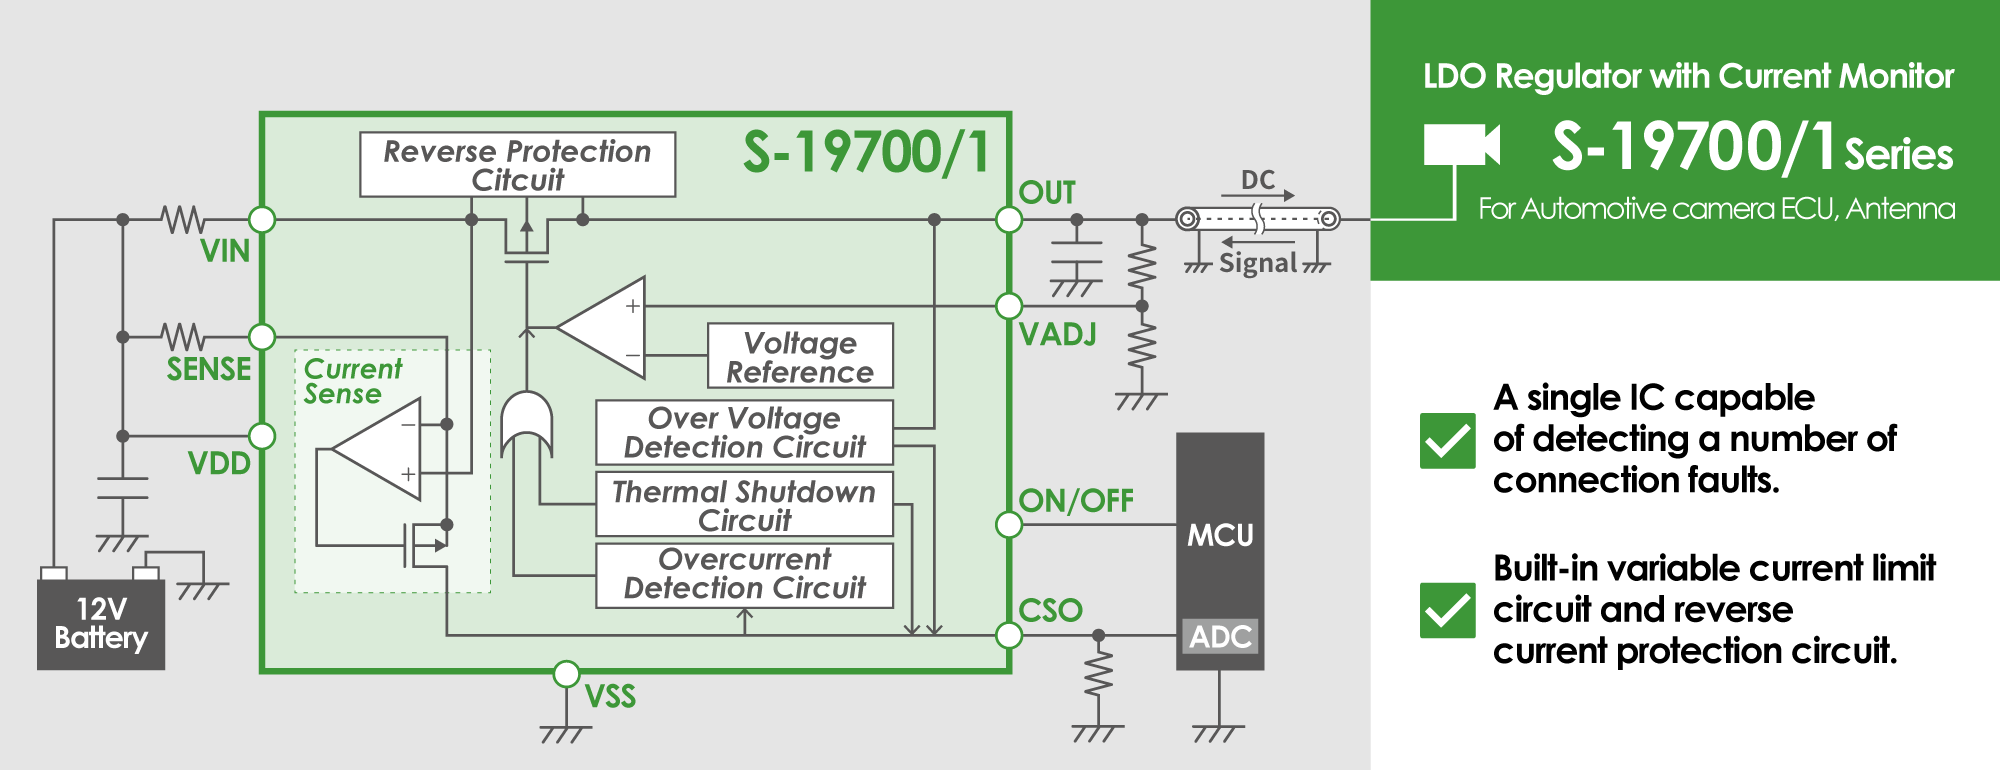 Automotive, 125°C Operation, 36 V Input, Voltage Regulator with Current Monitor And Adjustable Current Limit S-19700/1 Series